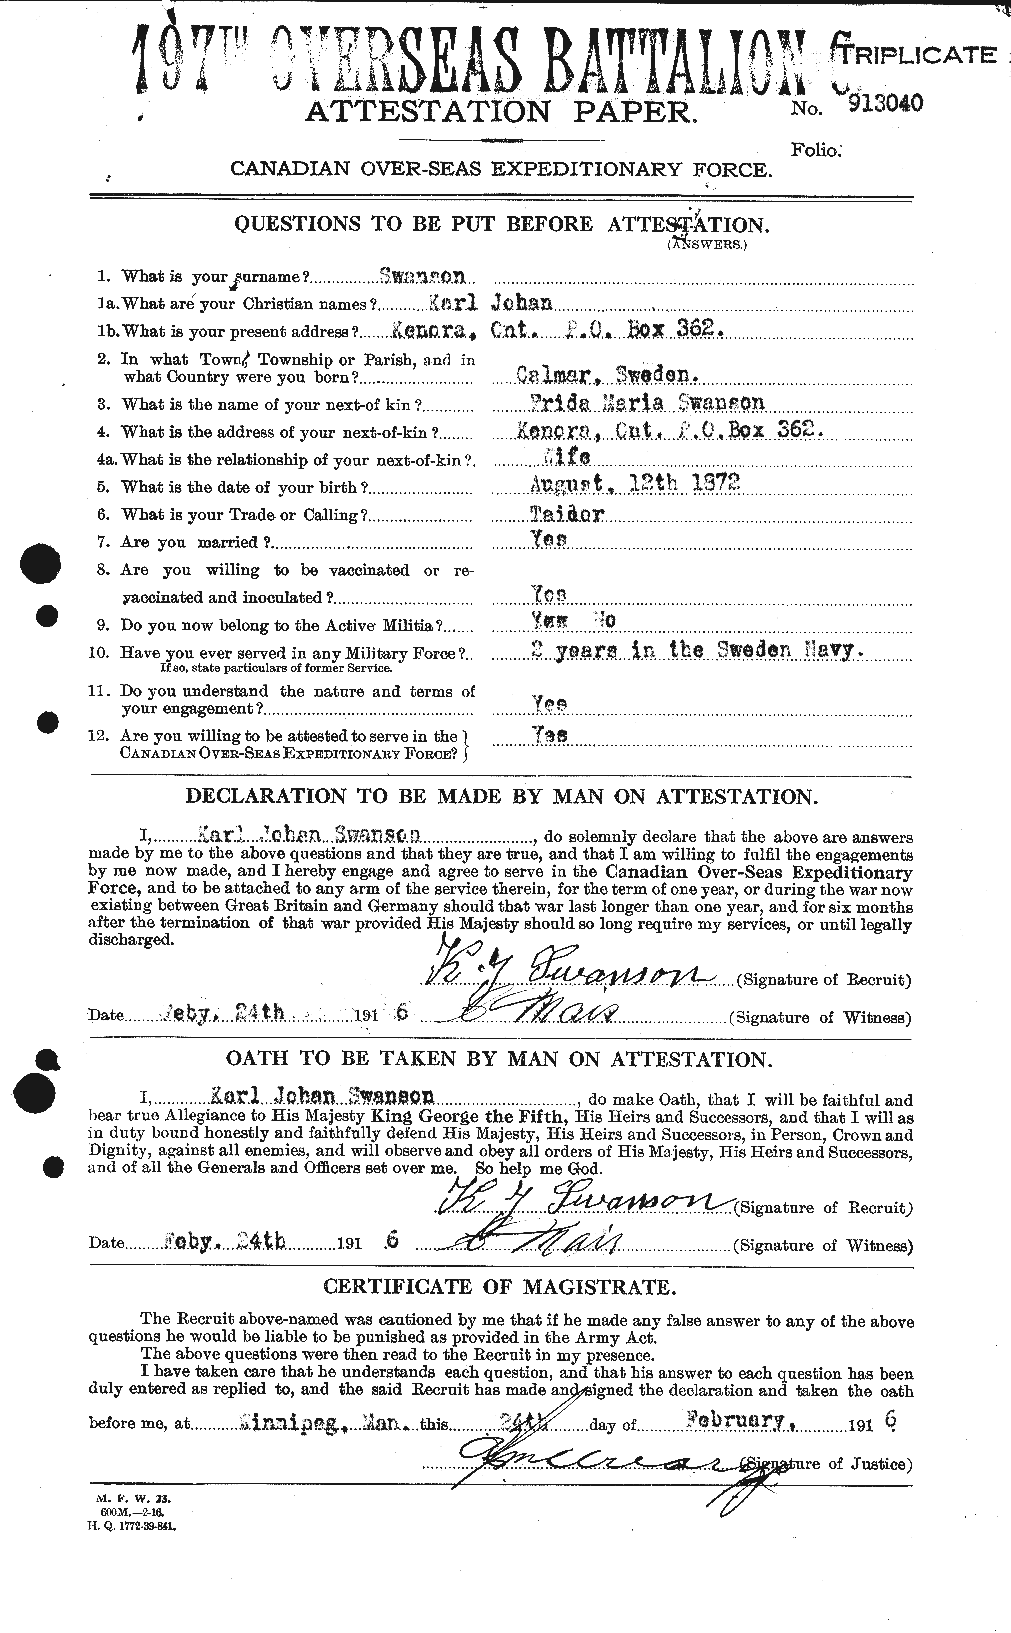 Personnel Records of the First World War - CEF 126571a